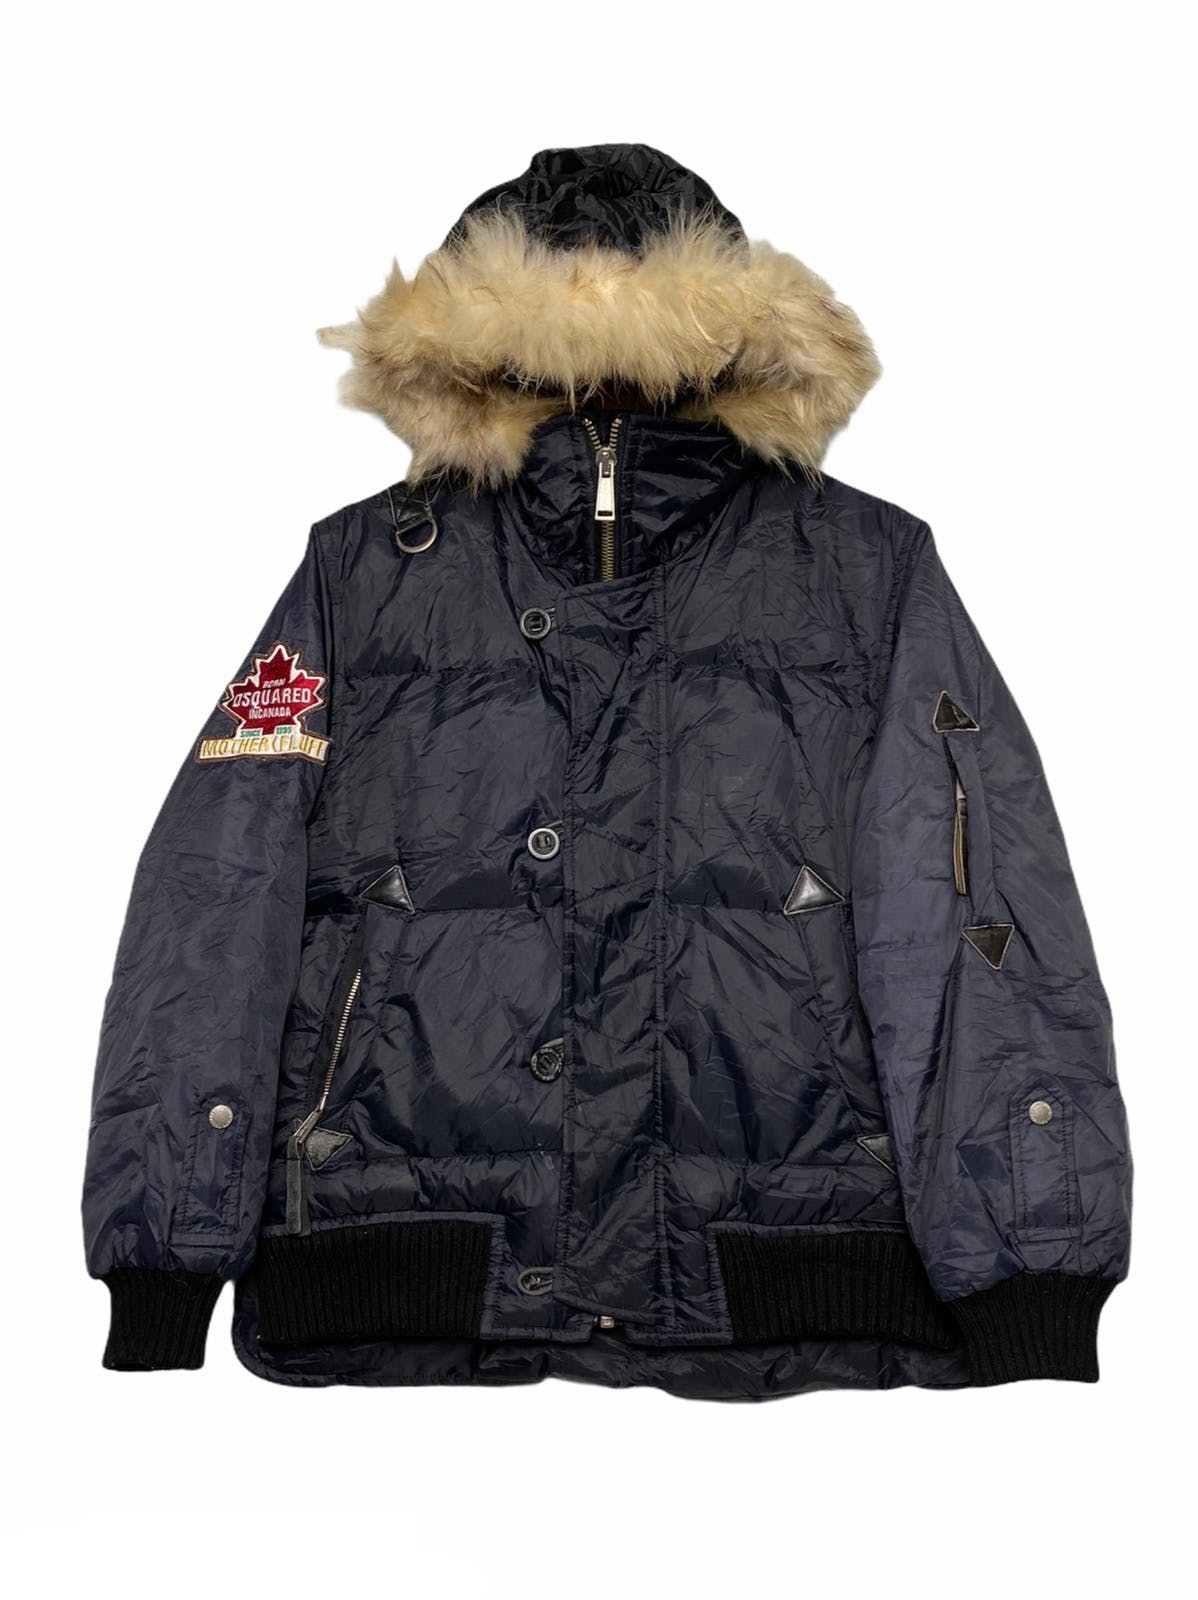 Vintage Dsquared2 Puffed Faux Winter Jacket - 1